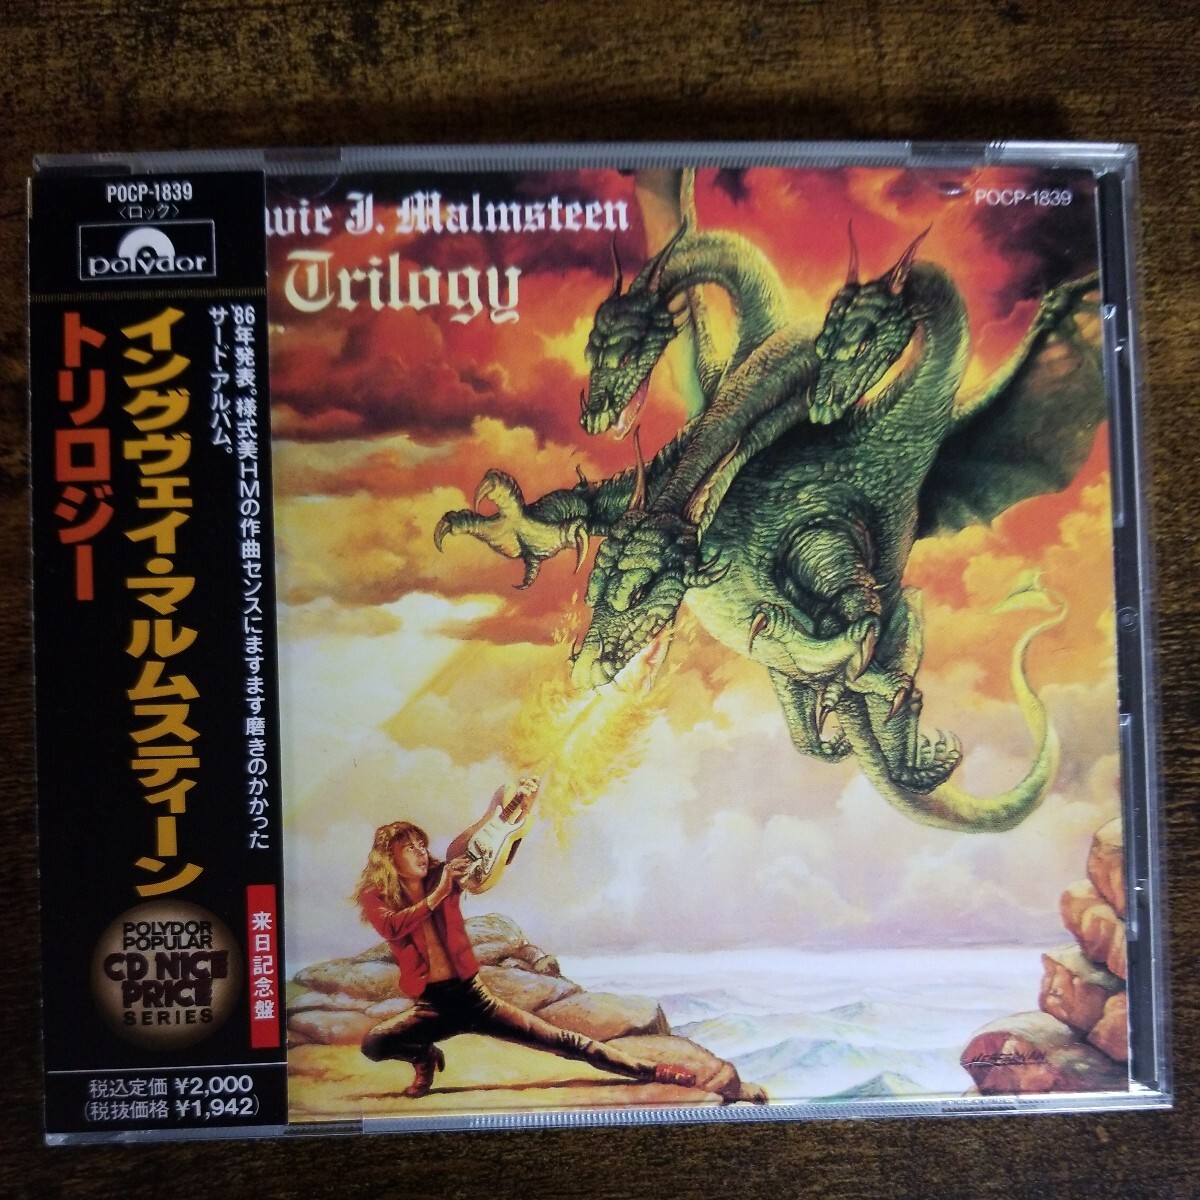 [ domestic record CD obi attaching ] wing vei* maru ms tea n trilogy Yngwie Malmsteen TRILOGY 1990 year domestic repeated departure version control number J